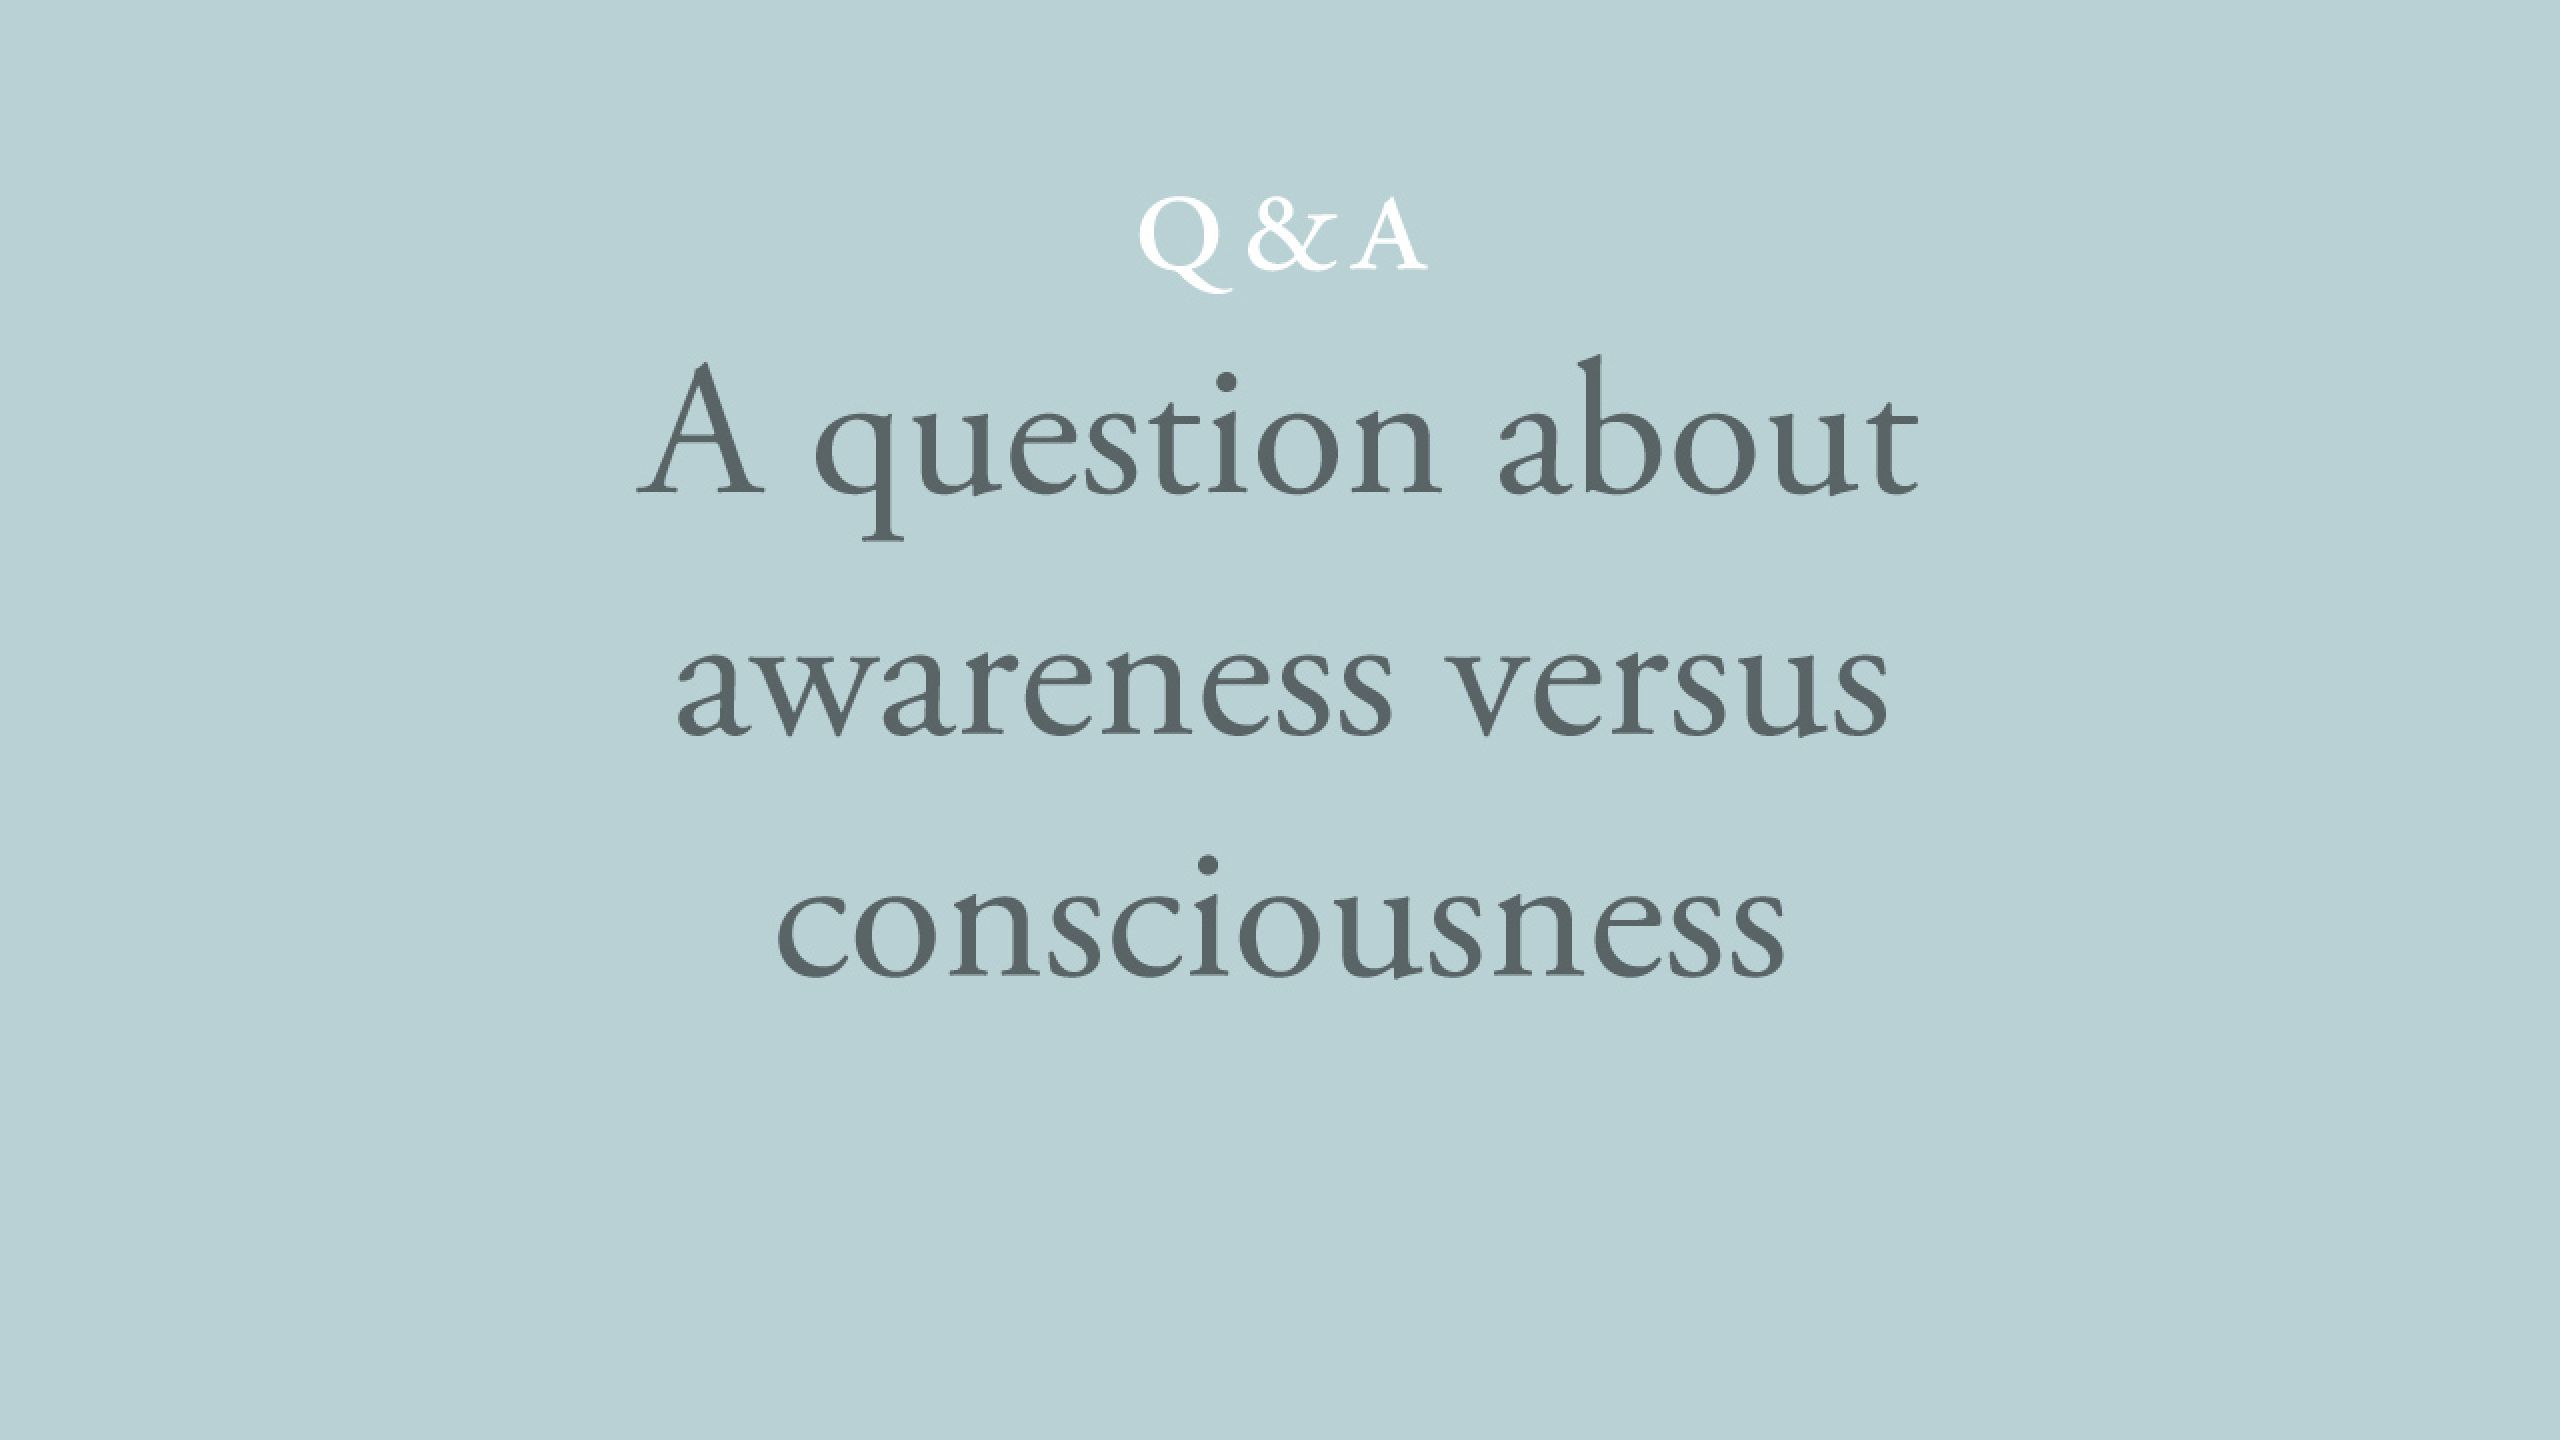 In your teaching, is awareness the same as consciousness?